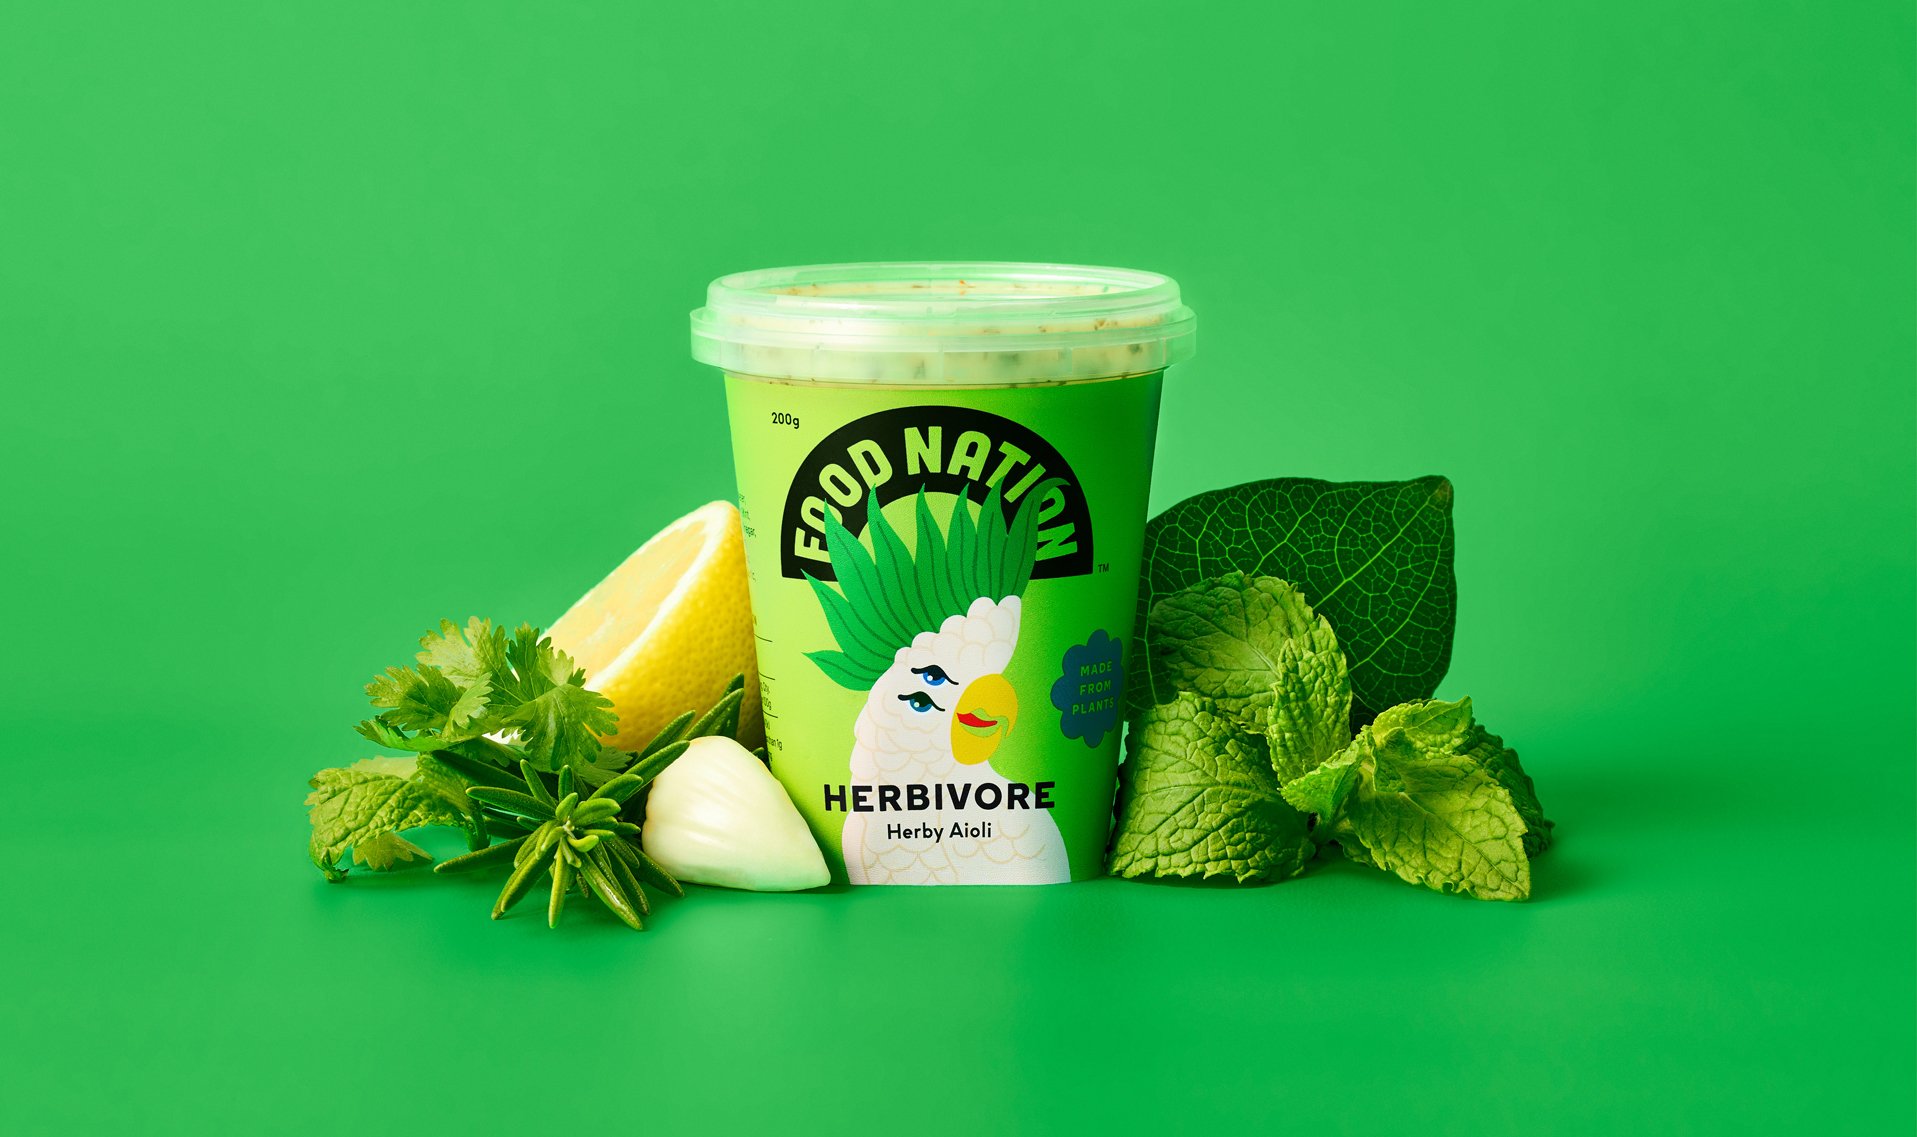 Visual identity and packaging design by New Zealand studio Seachange for plant-based food brand Food Nation.